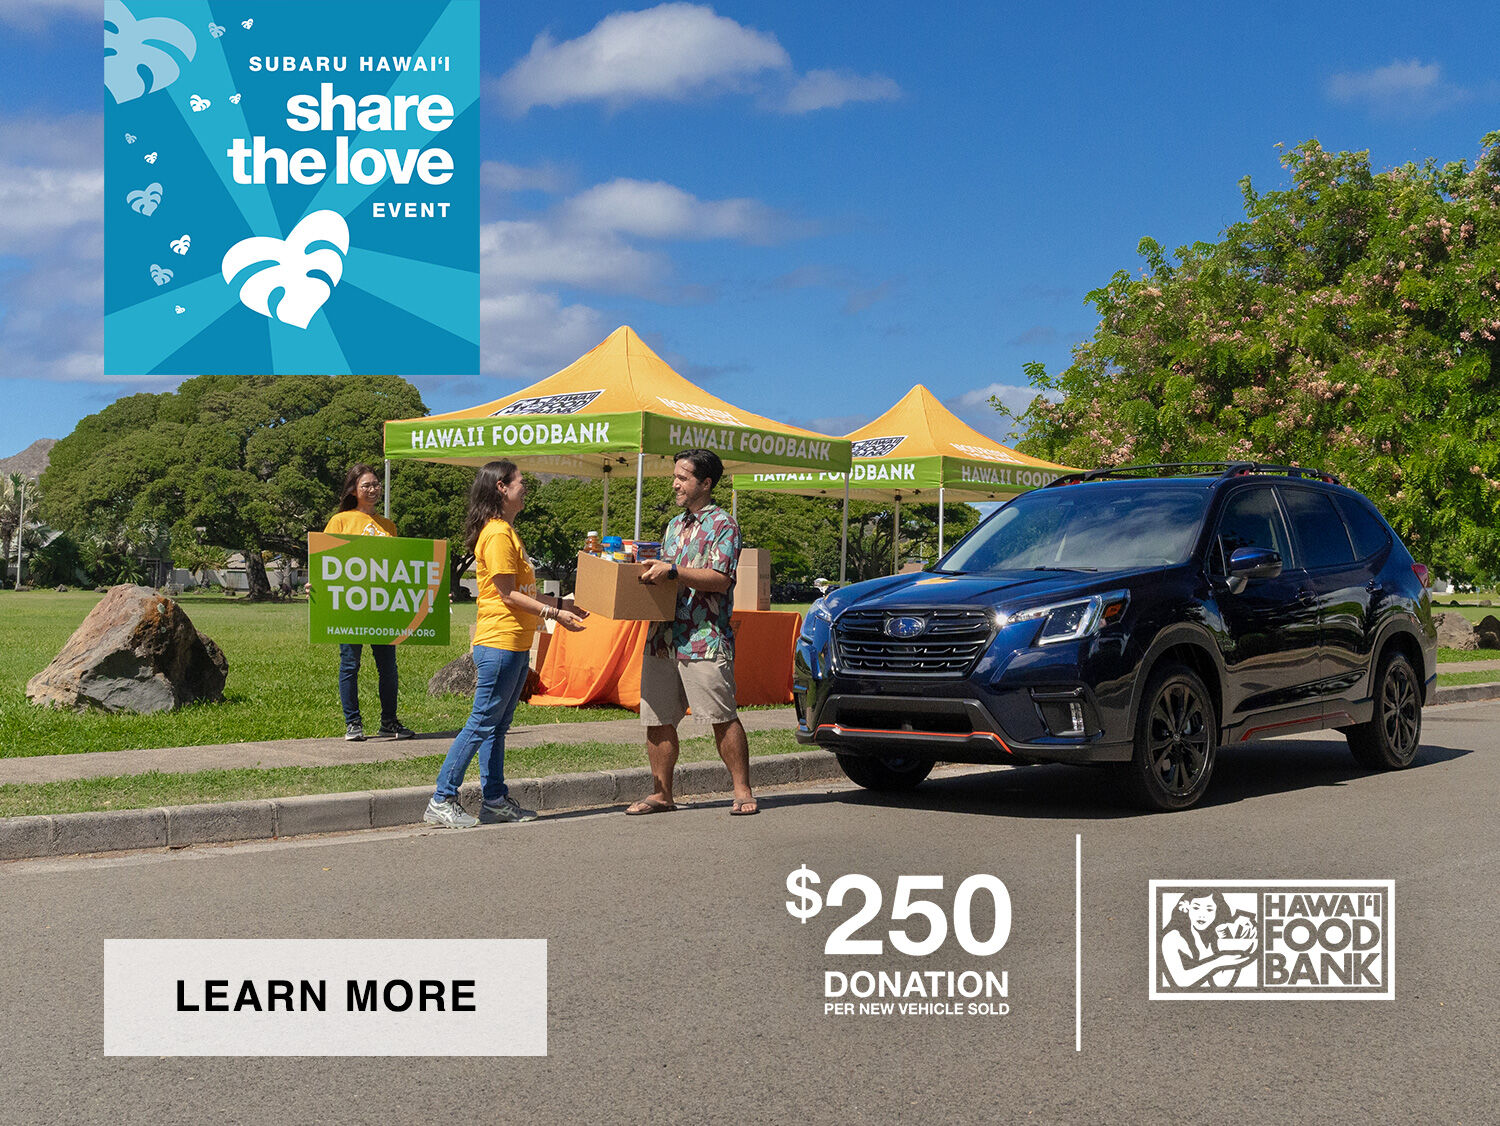 2022 Forester - Share the Love Event. $250 donation per vehicle sold.